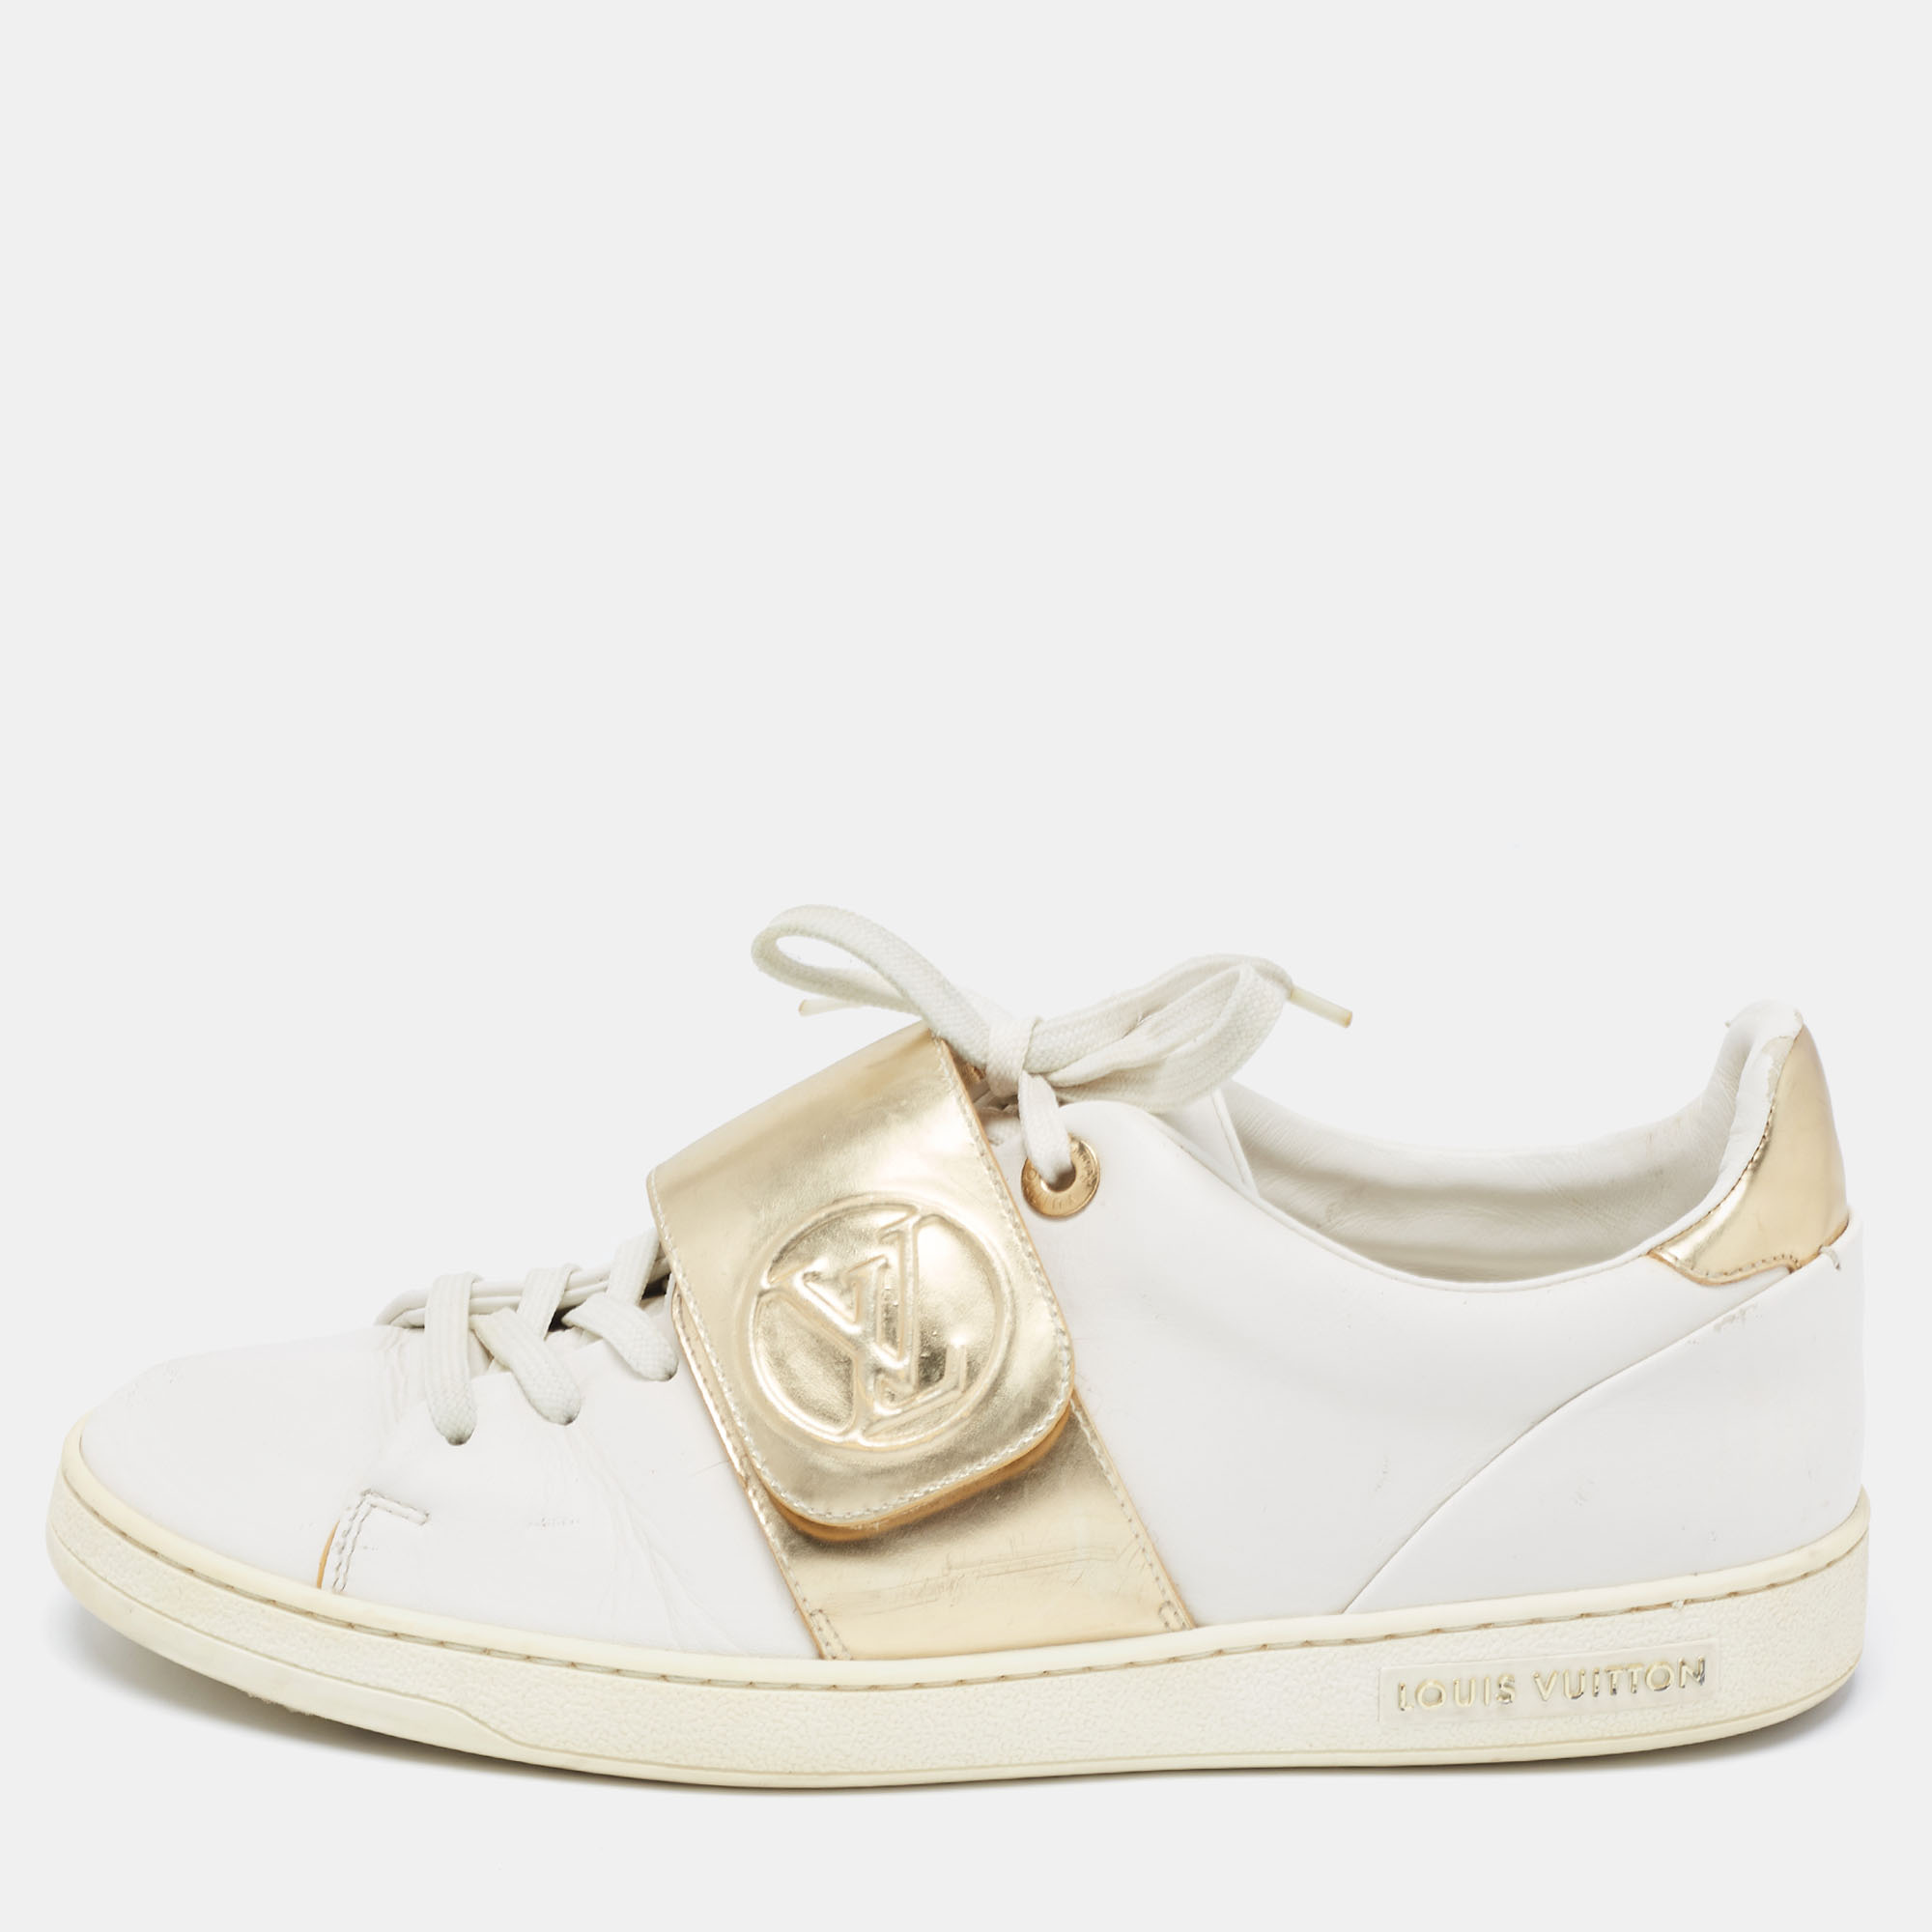 Louis Vuitton White Leather and Monogram Canvas Frontrow Sneakers